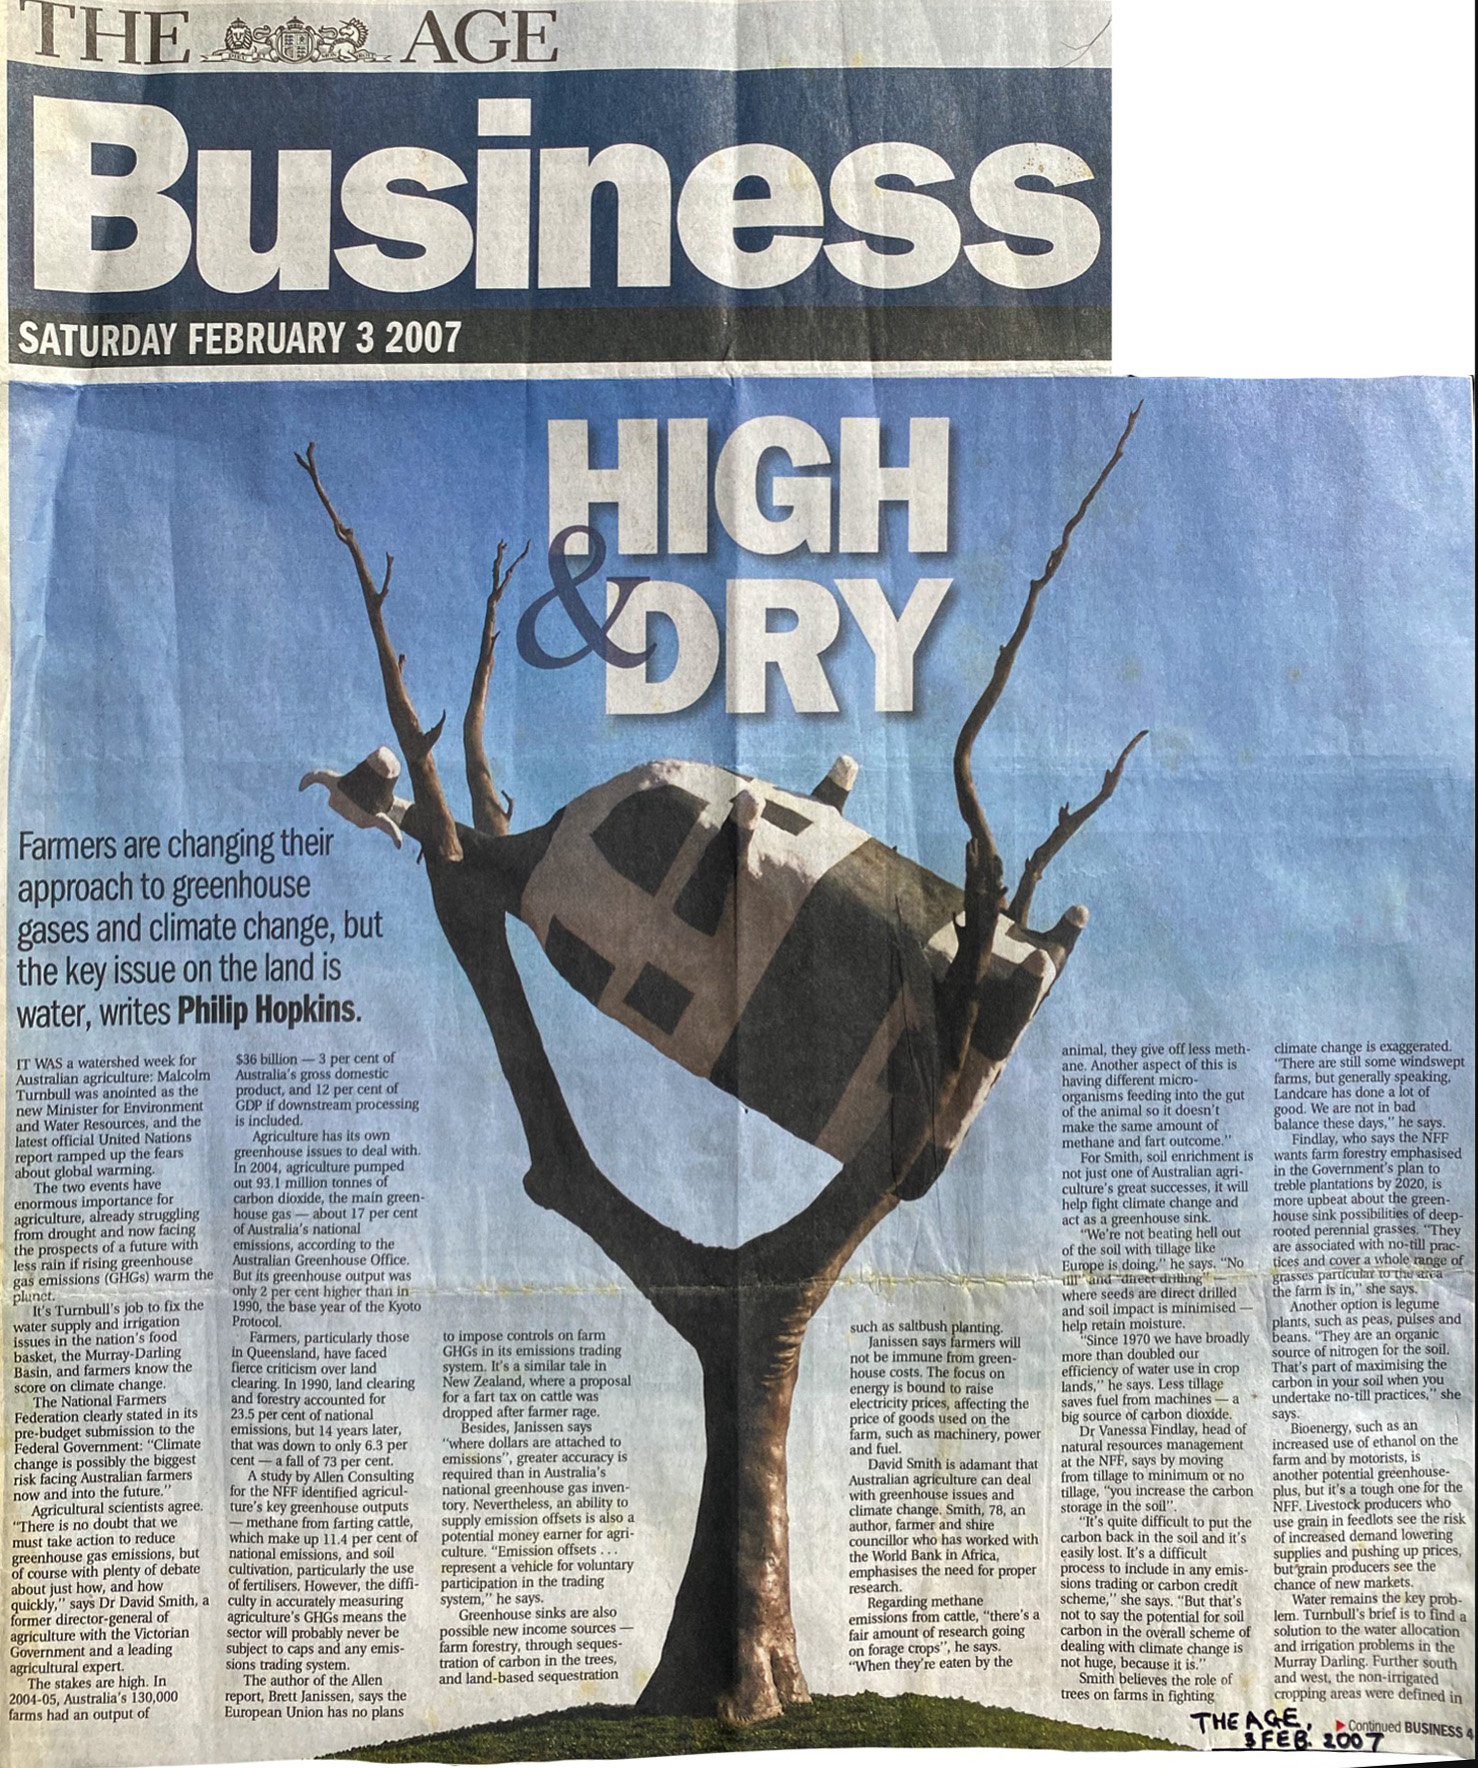 Philip Hopkins, ‘High & dry’, The Age, 3 February 2007; practically a full-page image in the newspaper of Cow up a Tree; the article is titled High & Dry, and the text overlaying the sky in the image is to do with agriculture